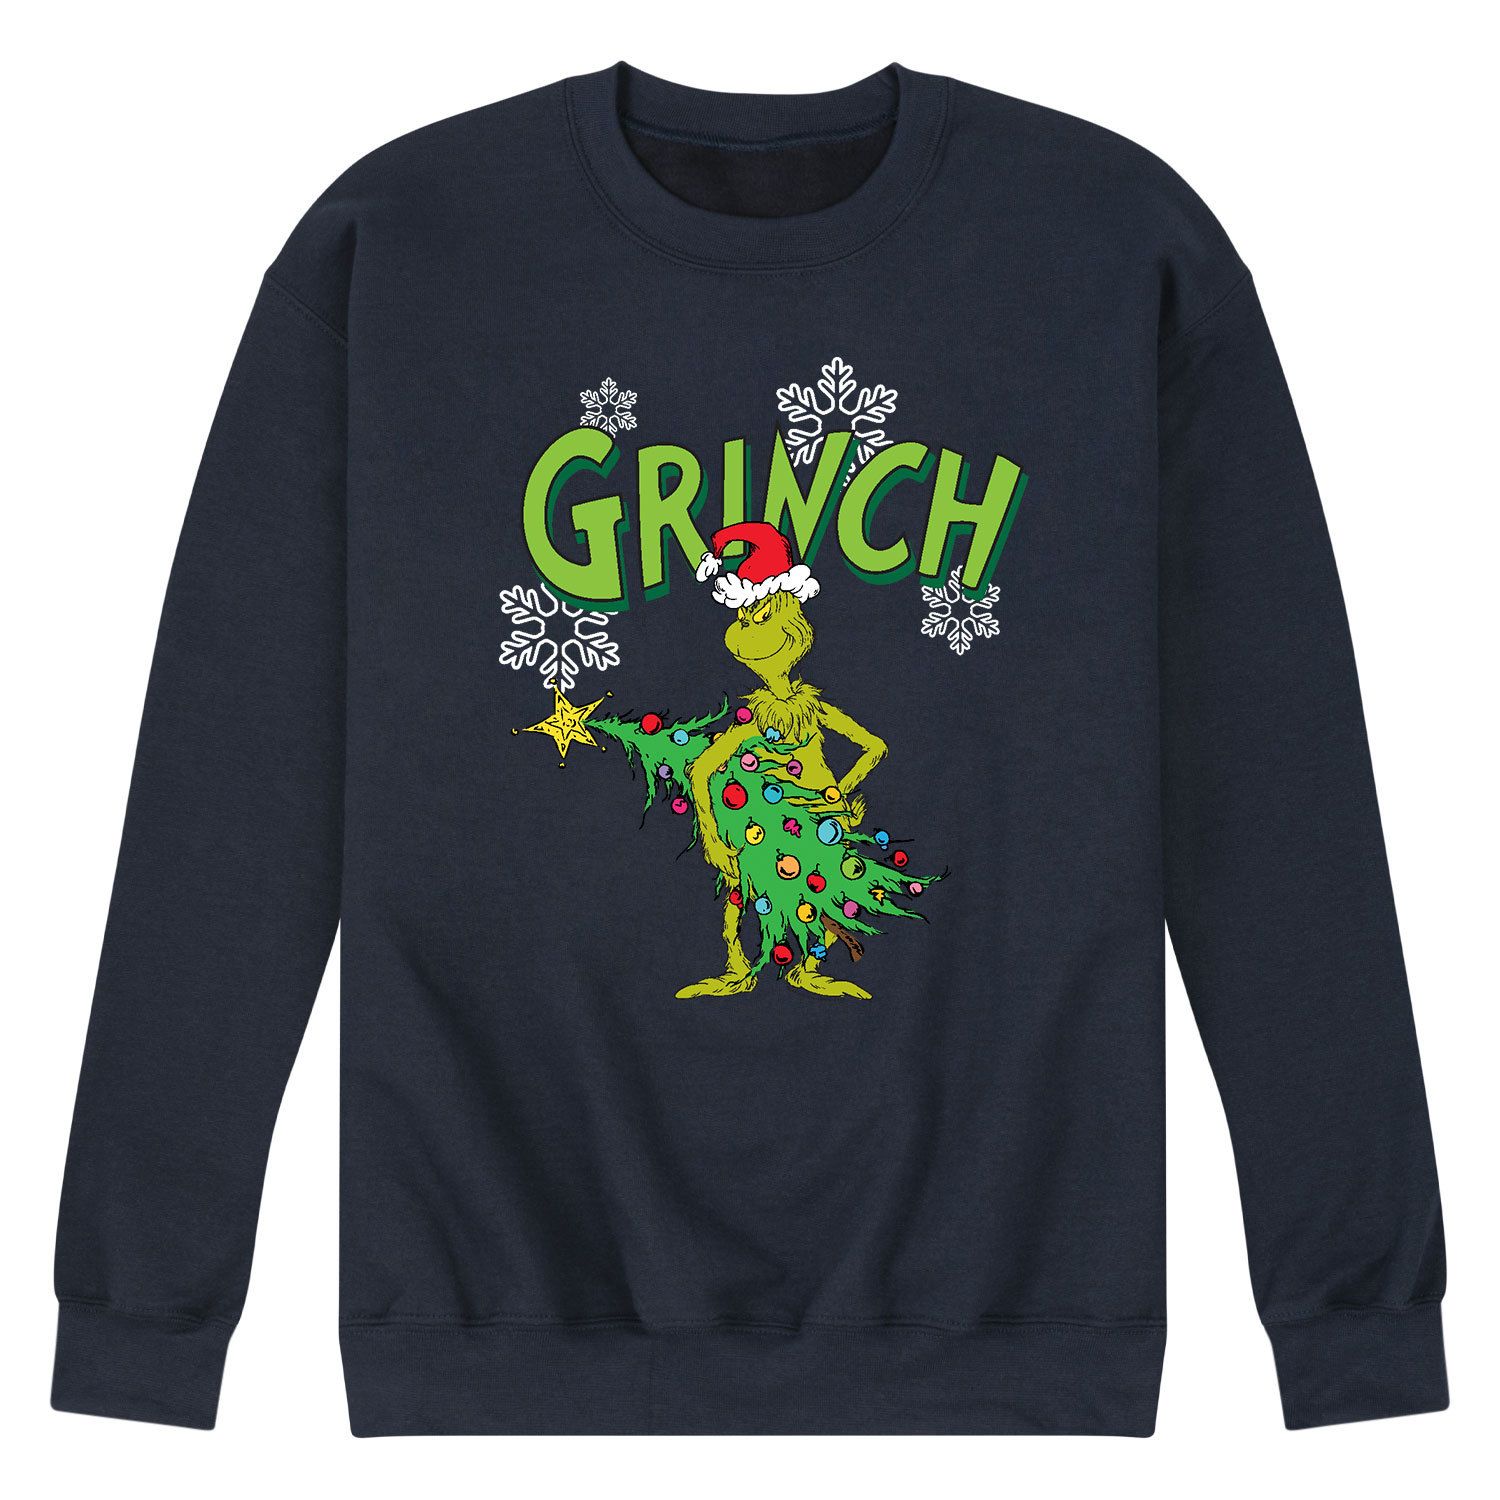 dr seuss the grinch the story of the movie Мужской свитшот Доктор Сьюз Гринч Licensed Character